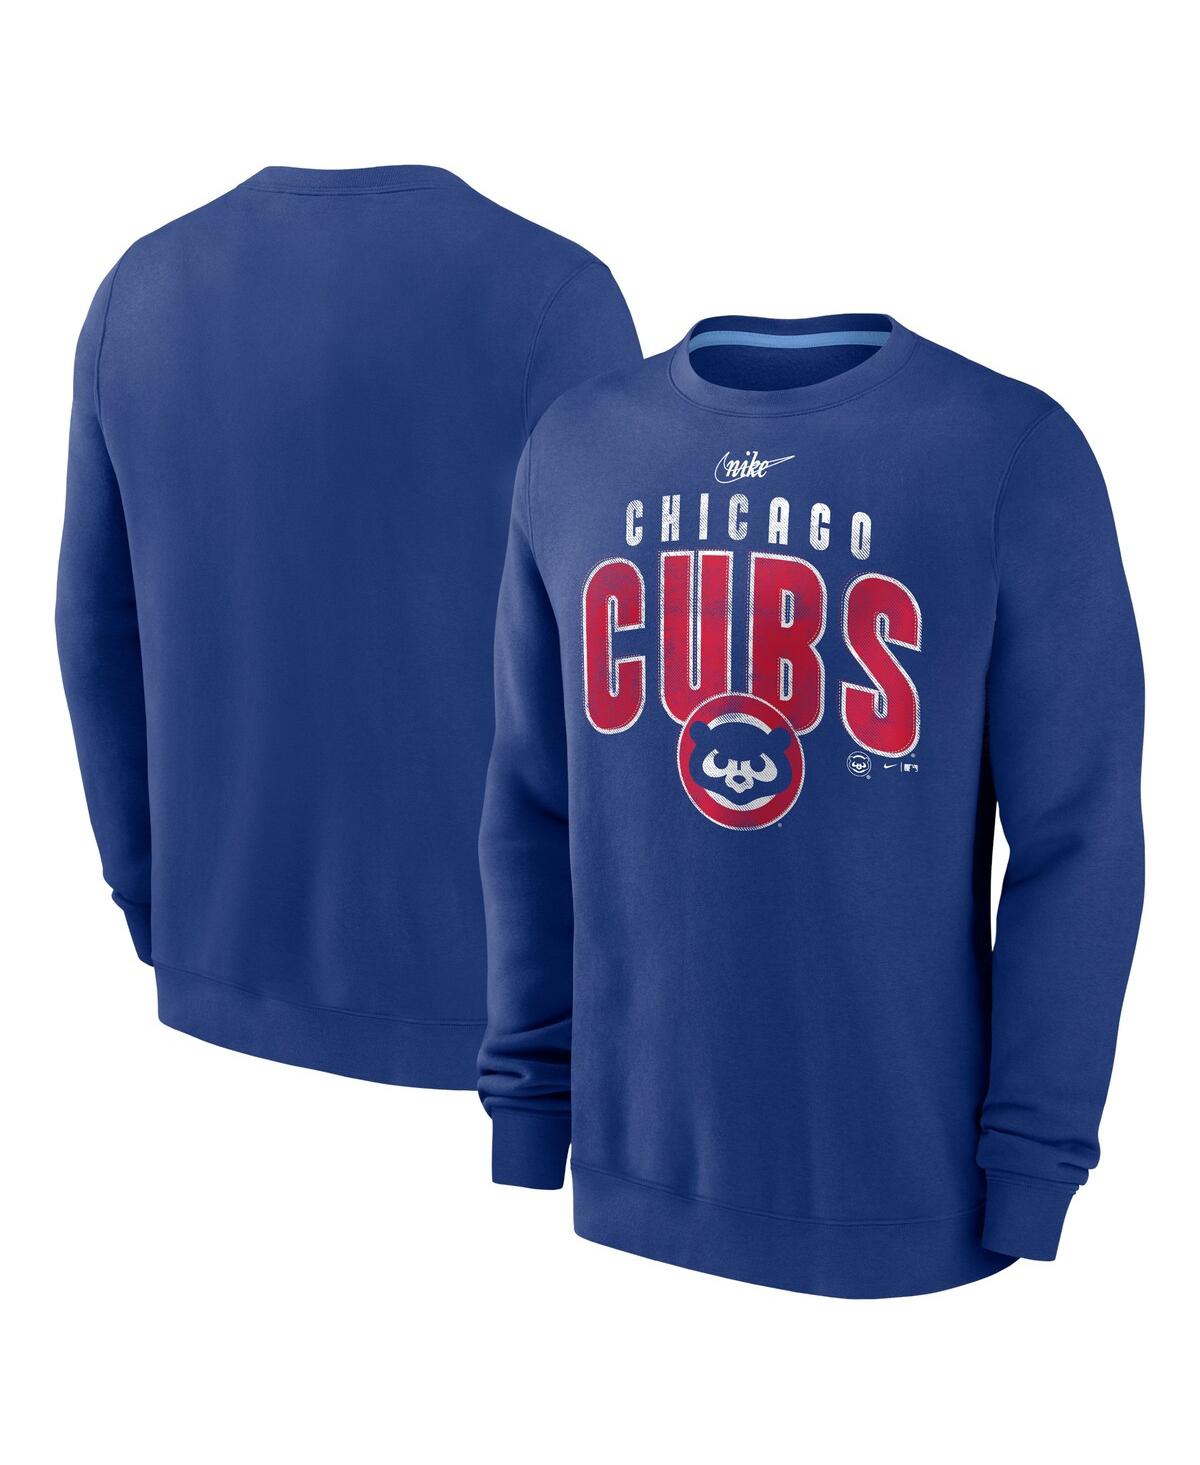 Men's Nike Royal Chicago Cubs Cooperstown Collection Team Shout Out Pullover Sweatshirt